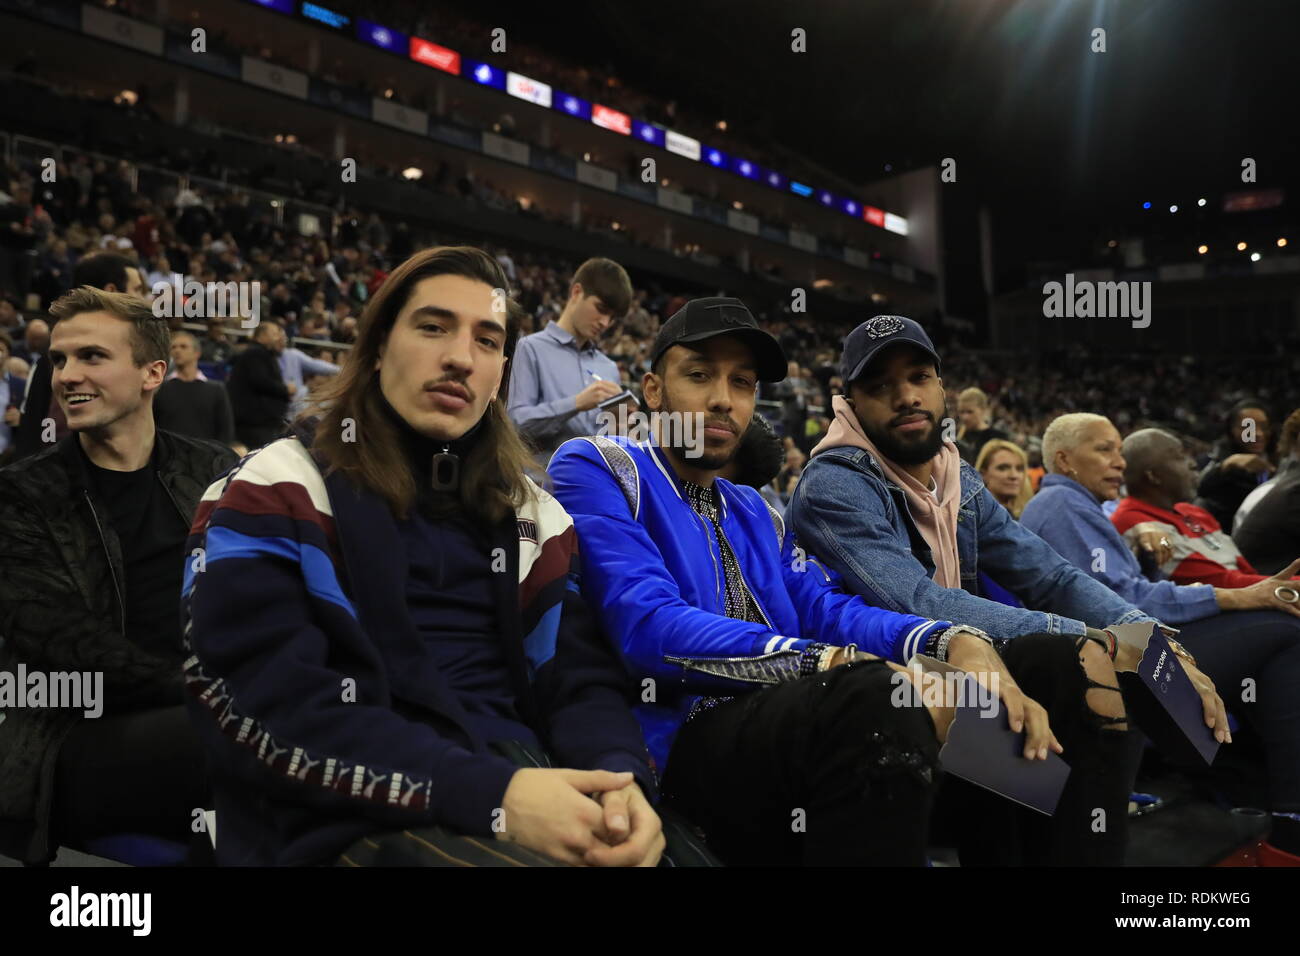 (From left to right) Hector Bellerin, Pierre-Emerick Aubameyang and Alexandre Lacazette in the crowd during the NBA London Game 2019 at the O2 Arena, London Stock Photo